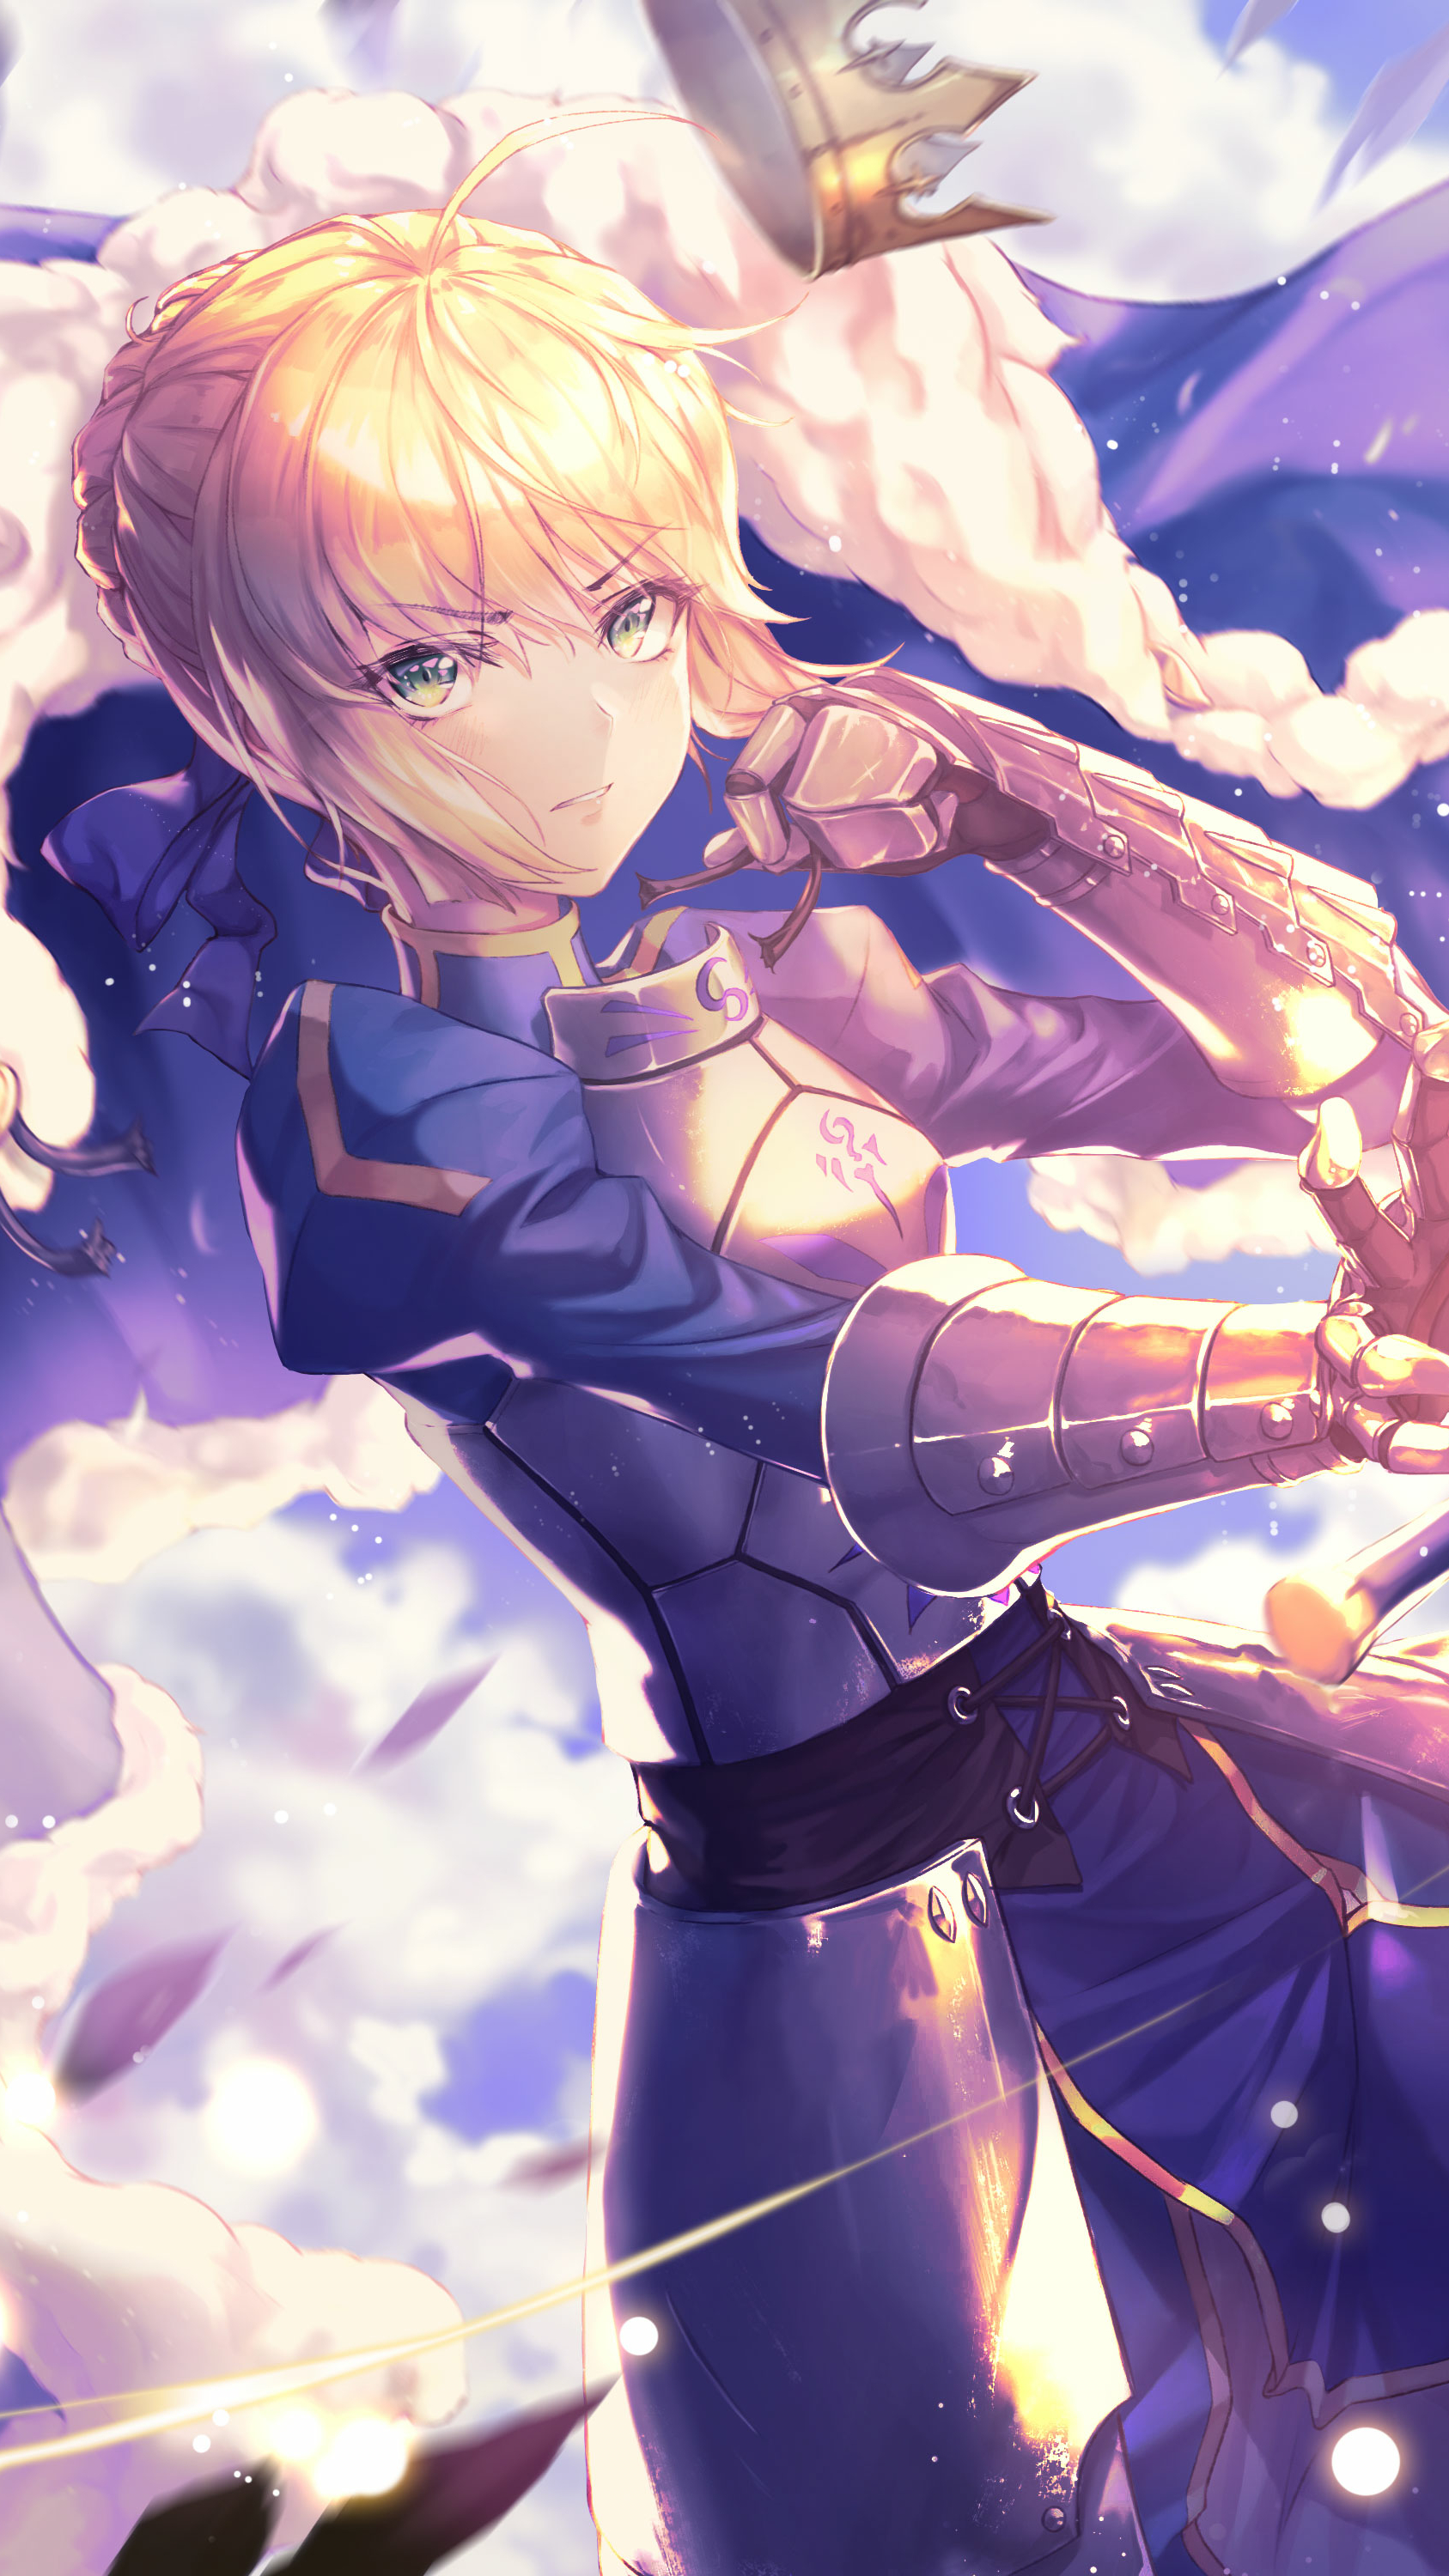 Saber - Fate Series by Chopped